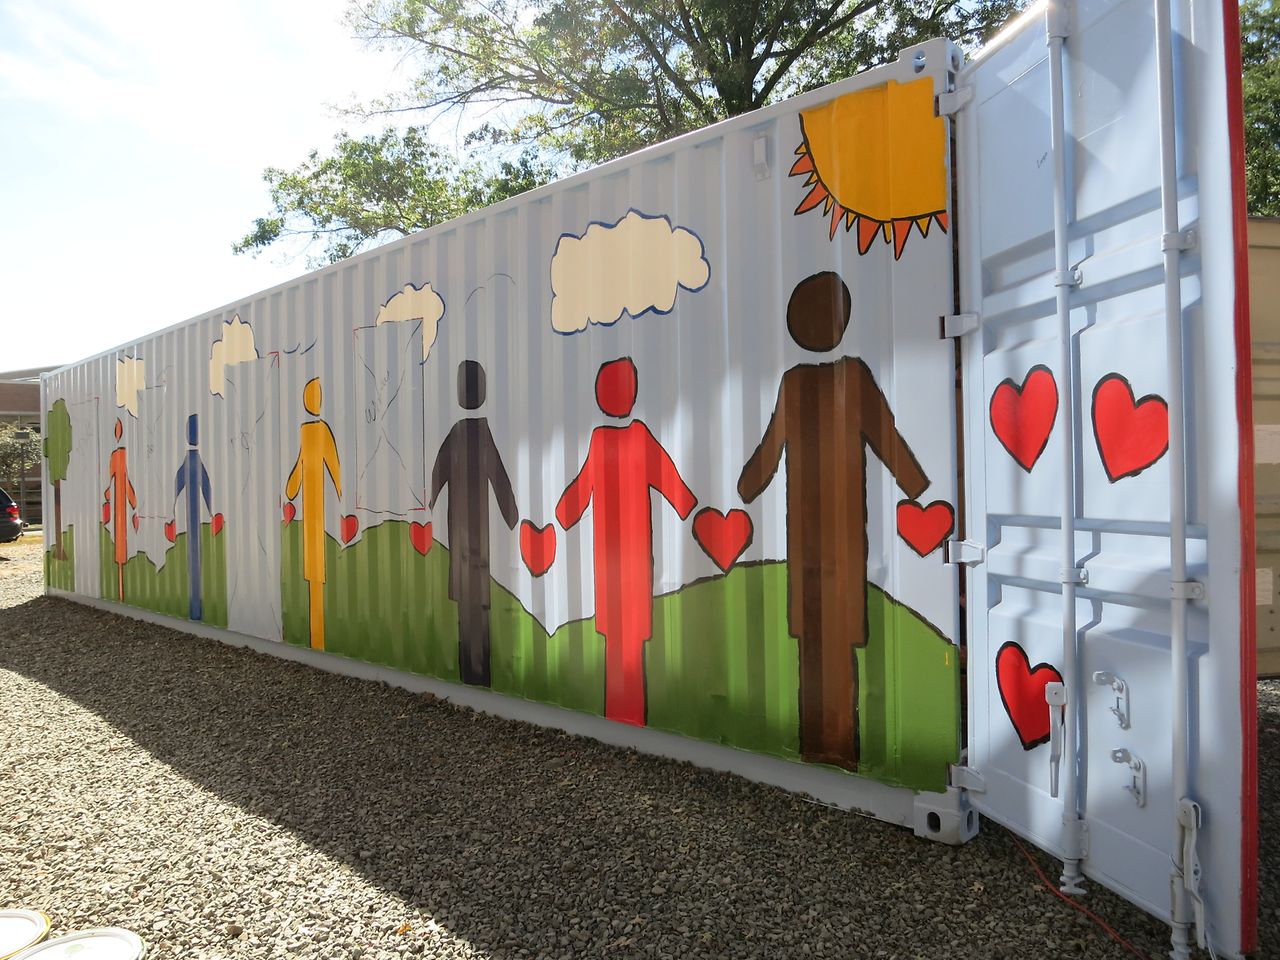 This cargo shipping container has been transformed into a classroom for children in South Africa.